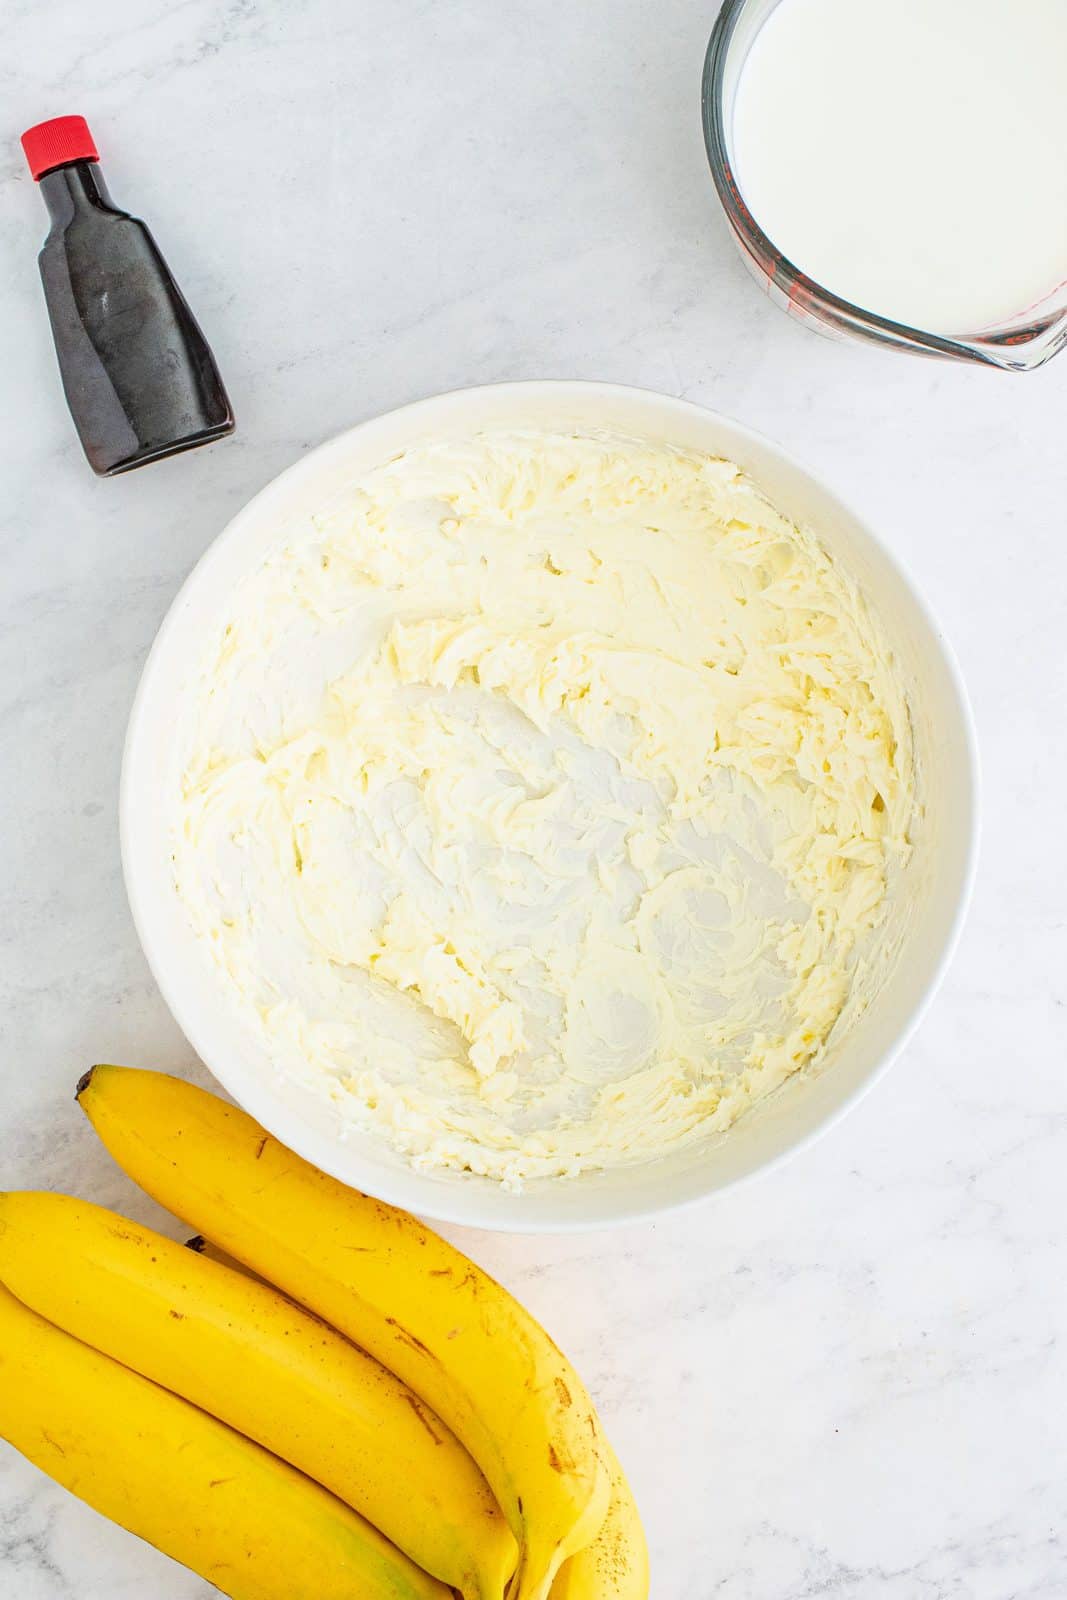 softened cream cheese whipped with an electric mixer in a white bowl.